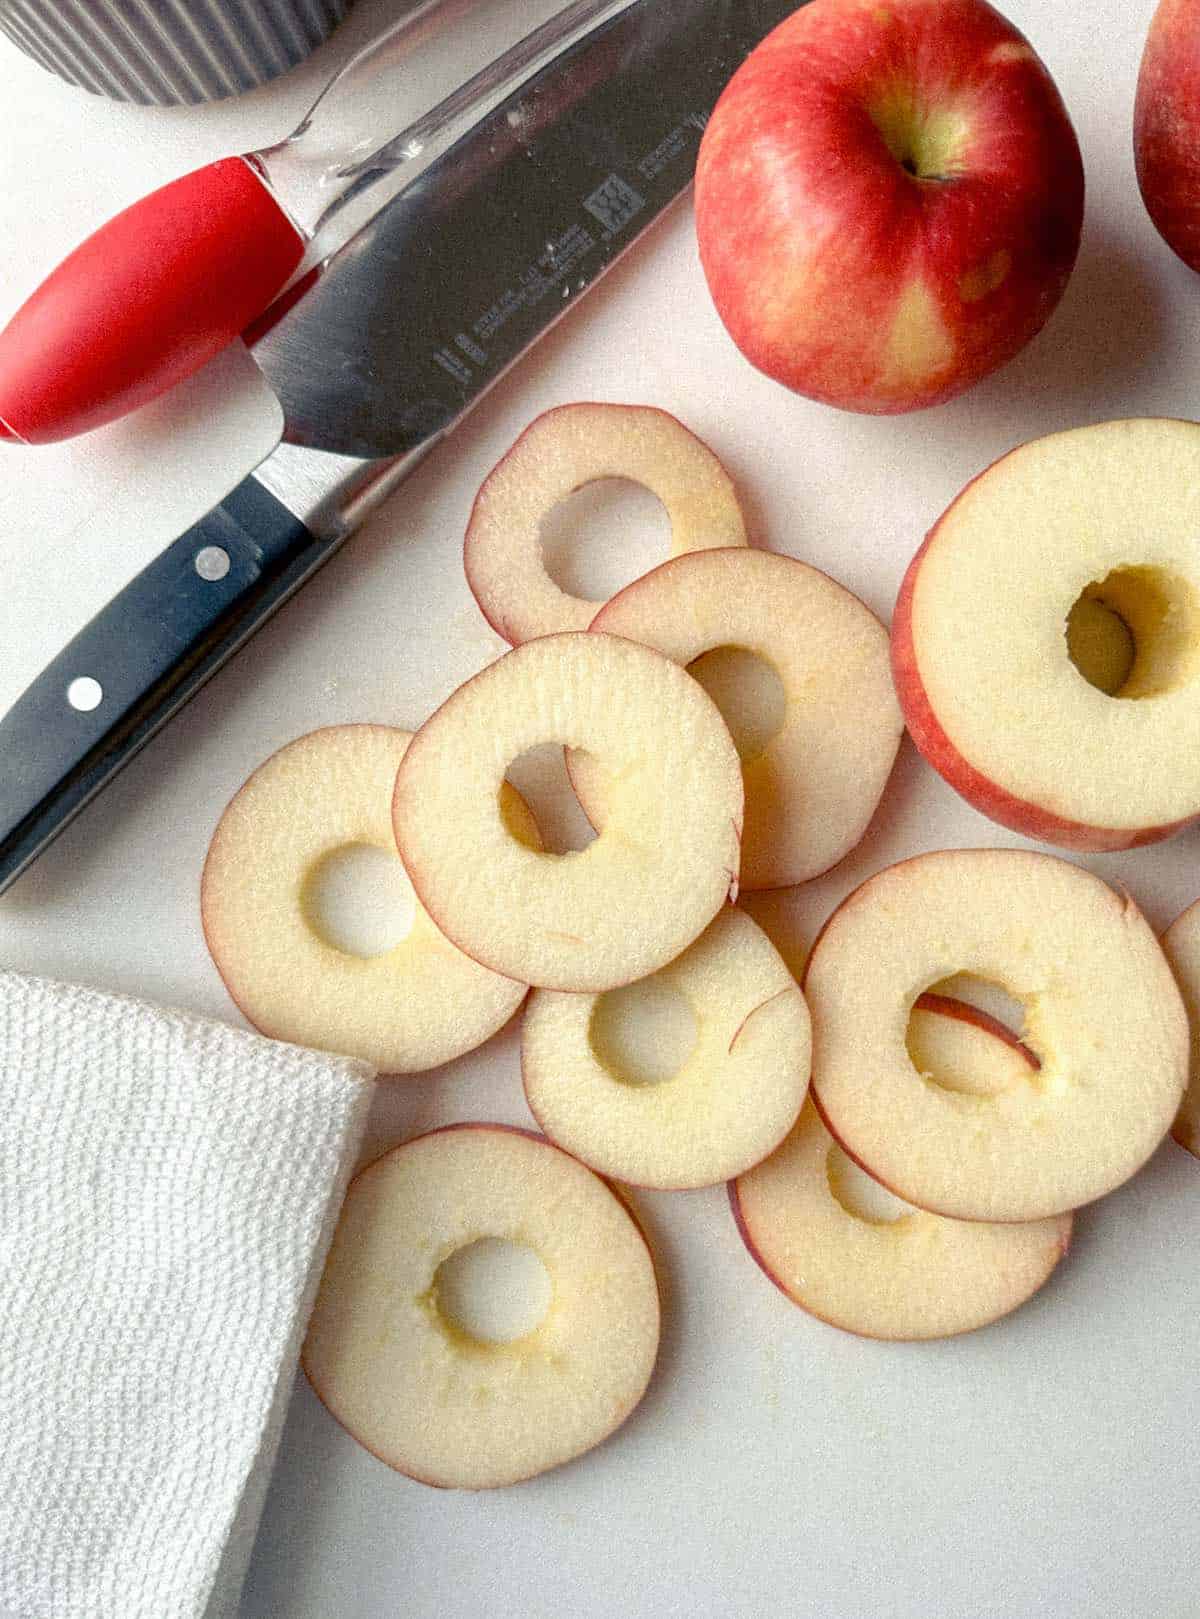 Cored apple slices on a cutting board with a knife.